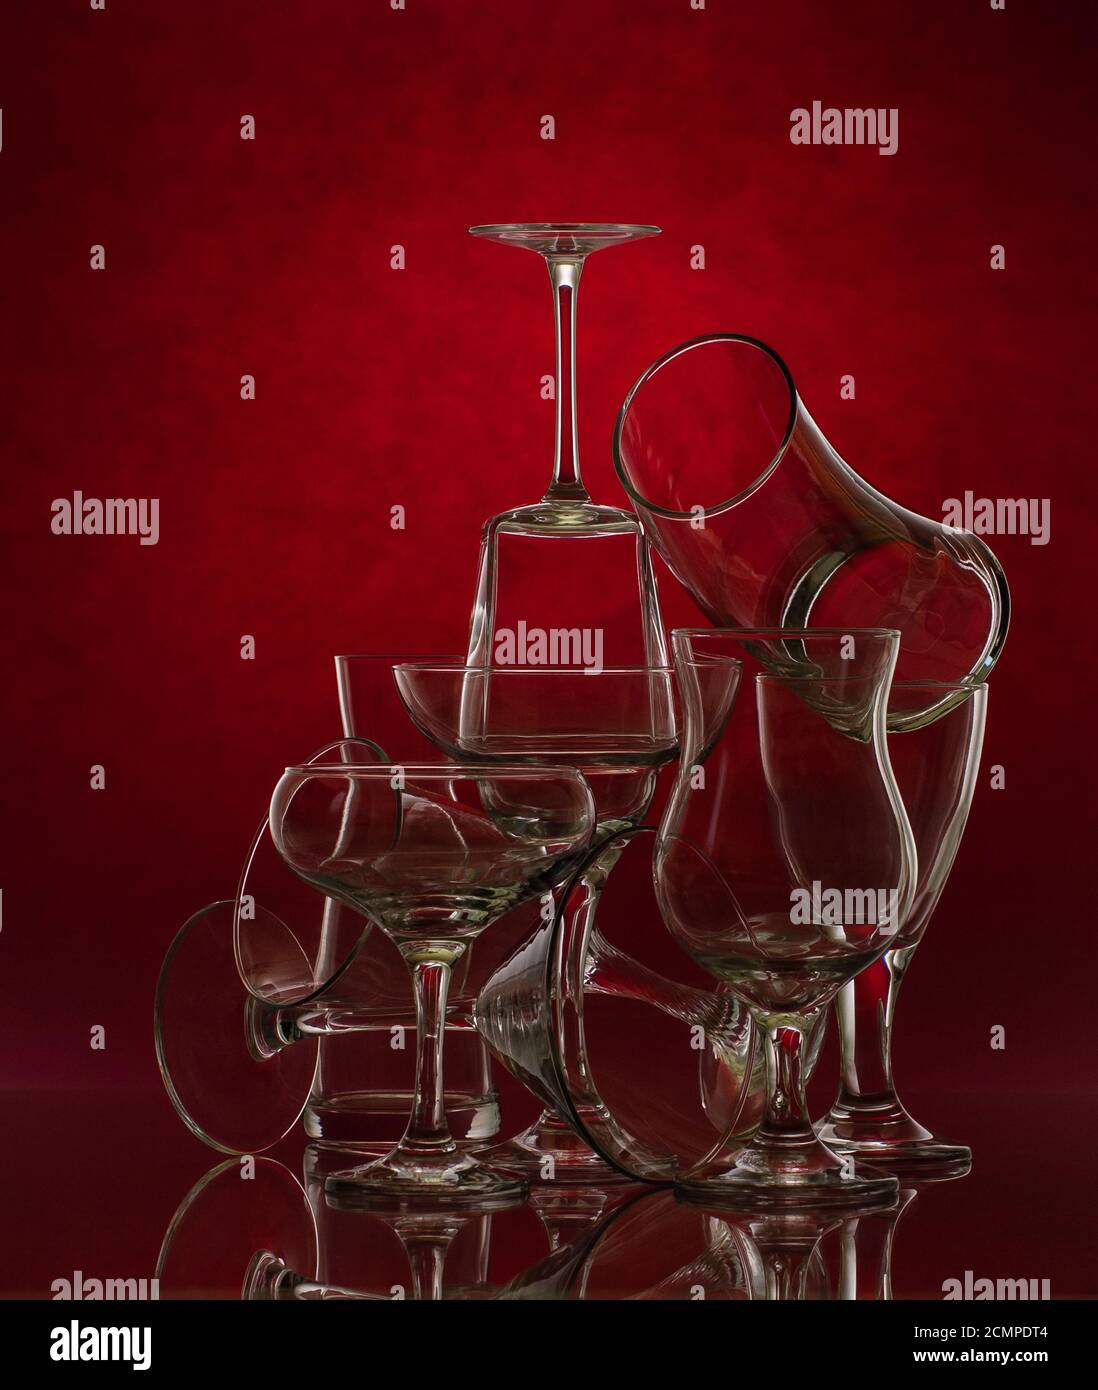 Composition of glass glasses of different shapes on a red background. Art photography. Stock Photo